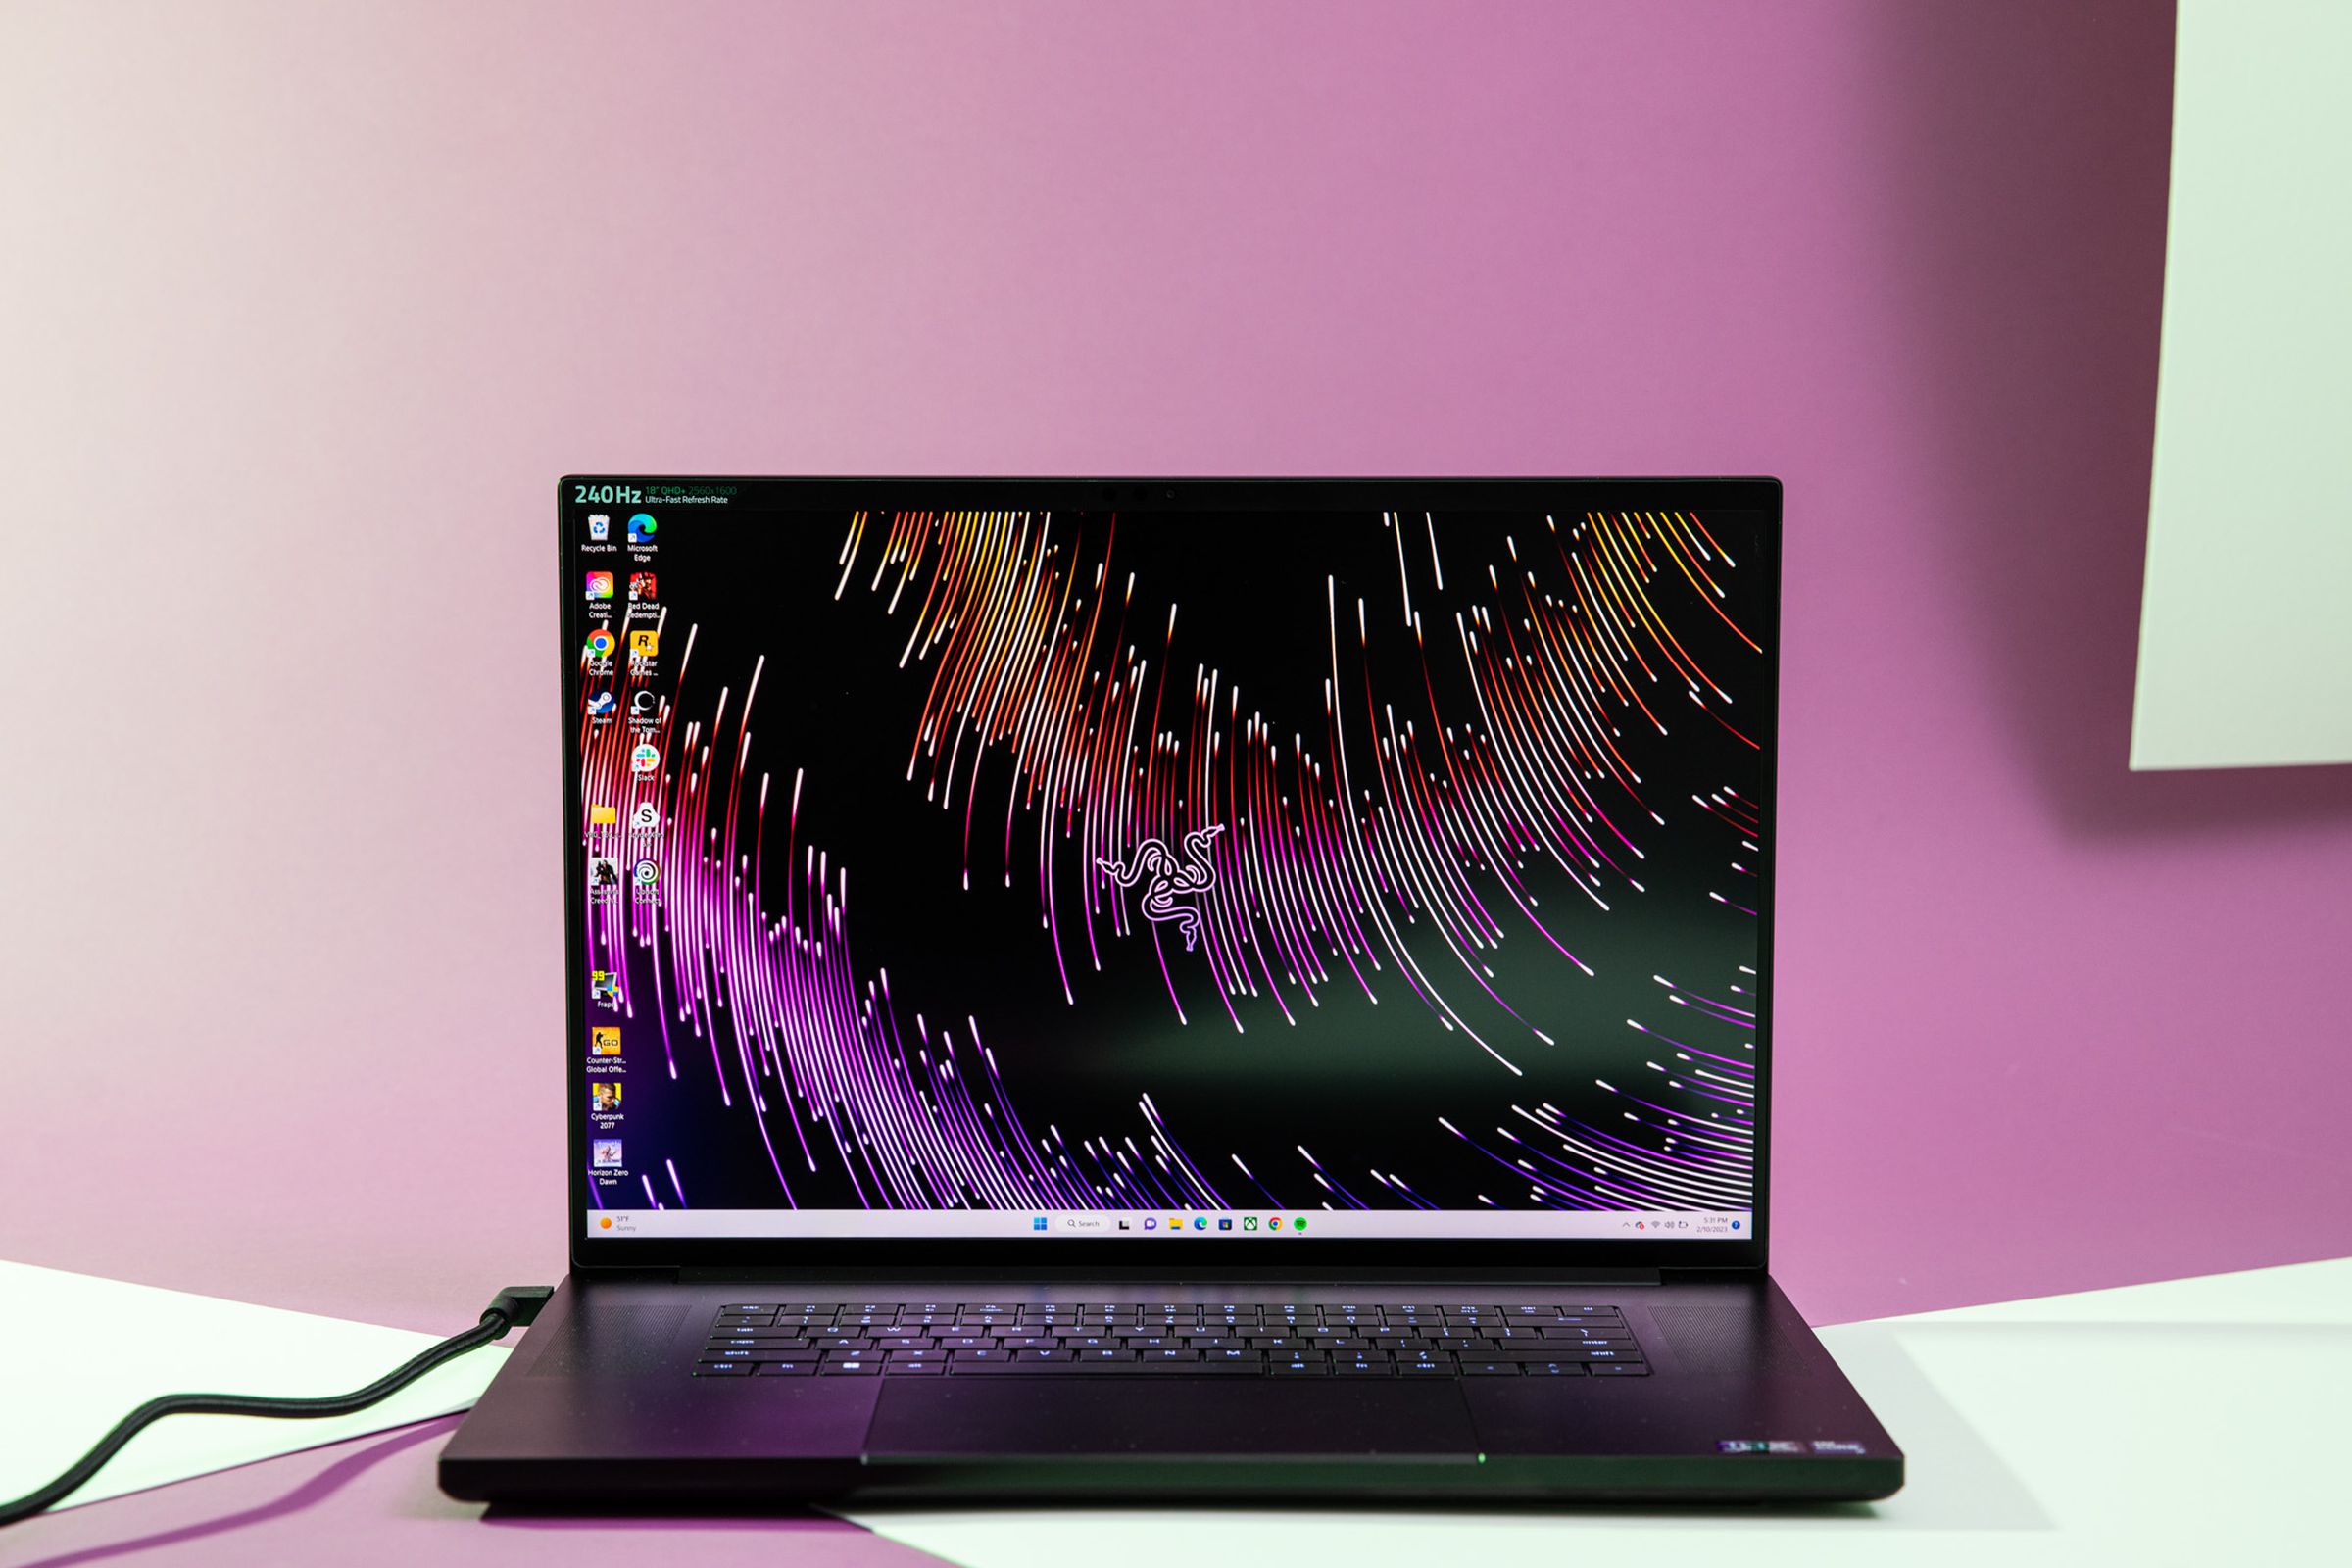 The Razer Blade 18 open, displaying a desktop background with fireworks.